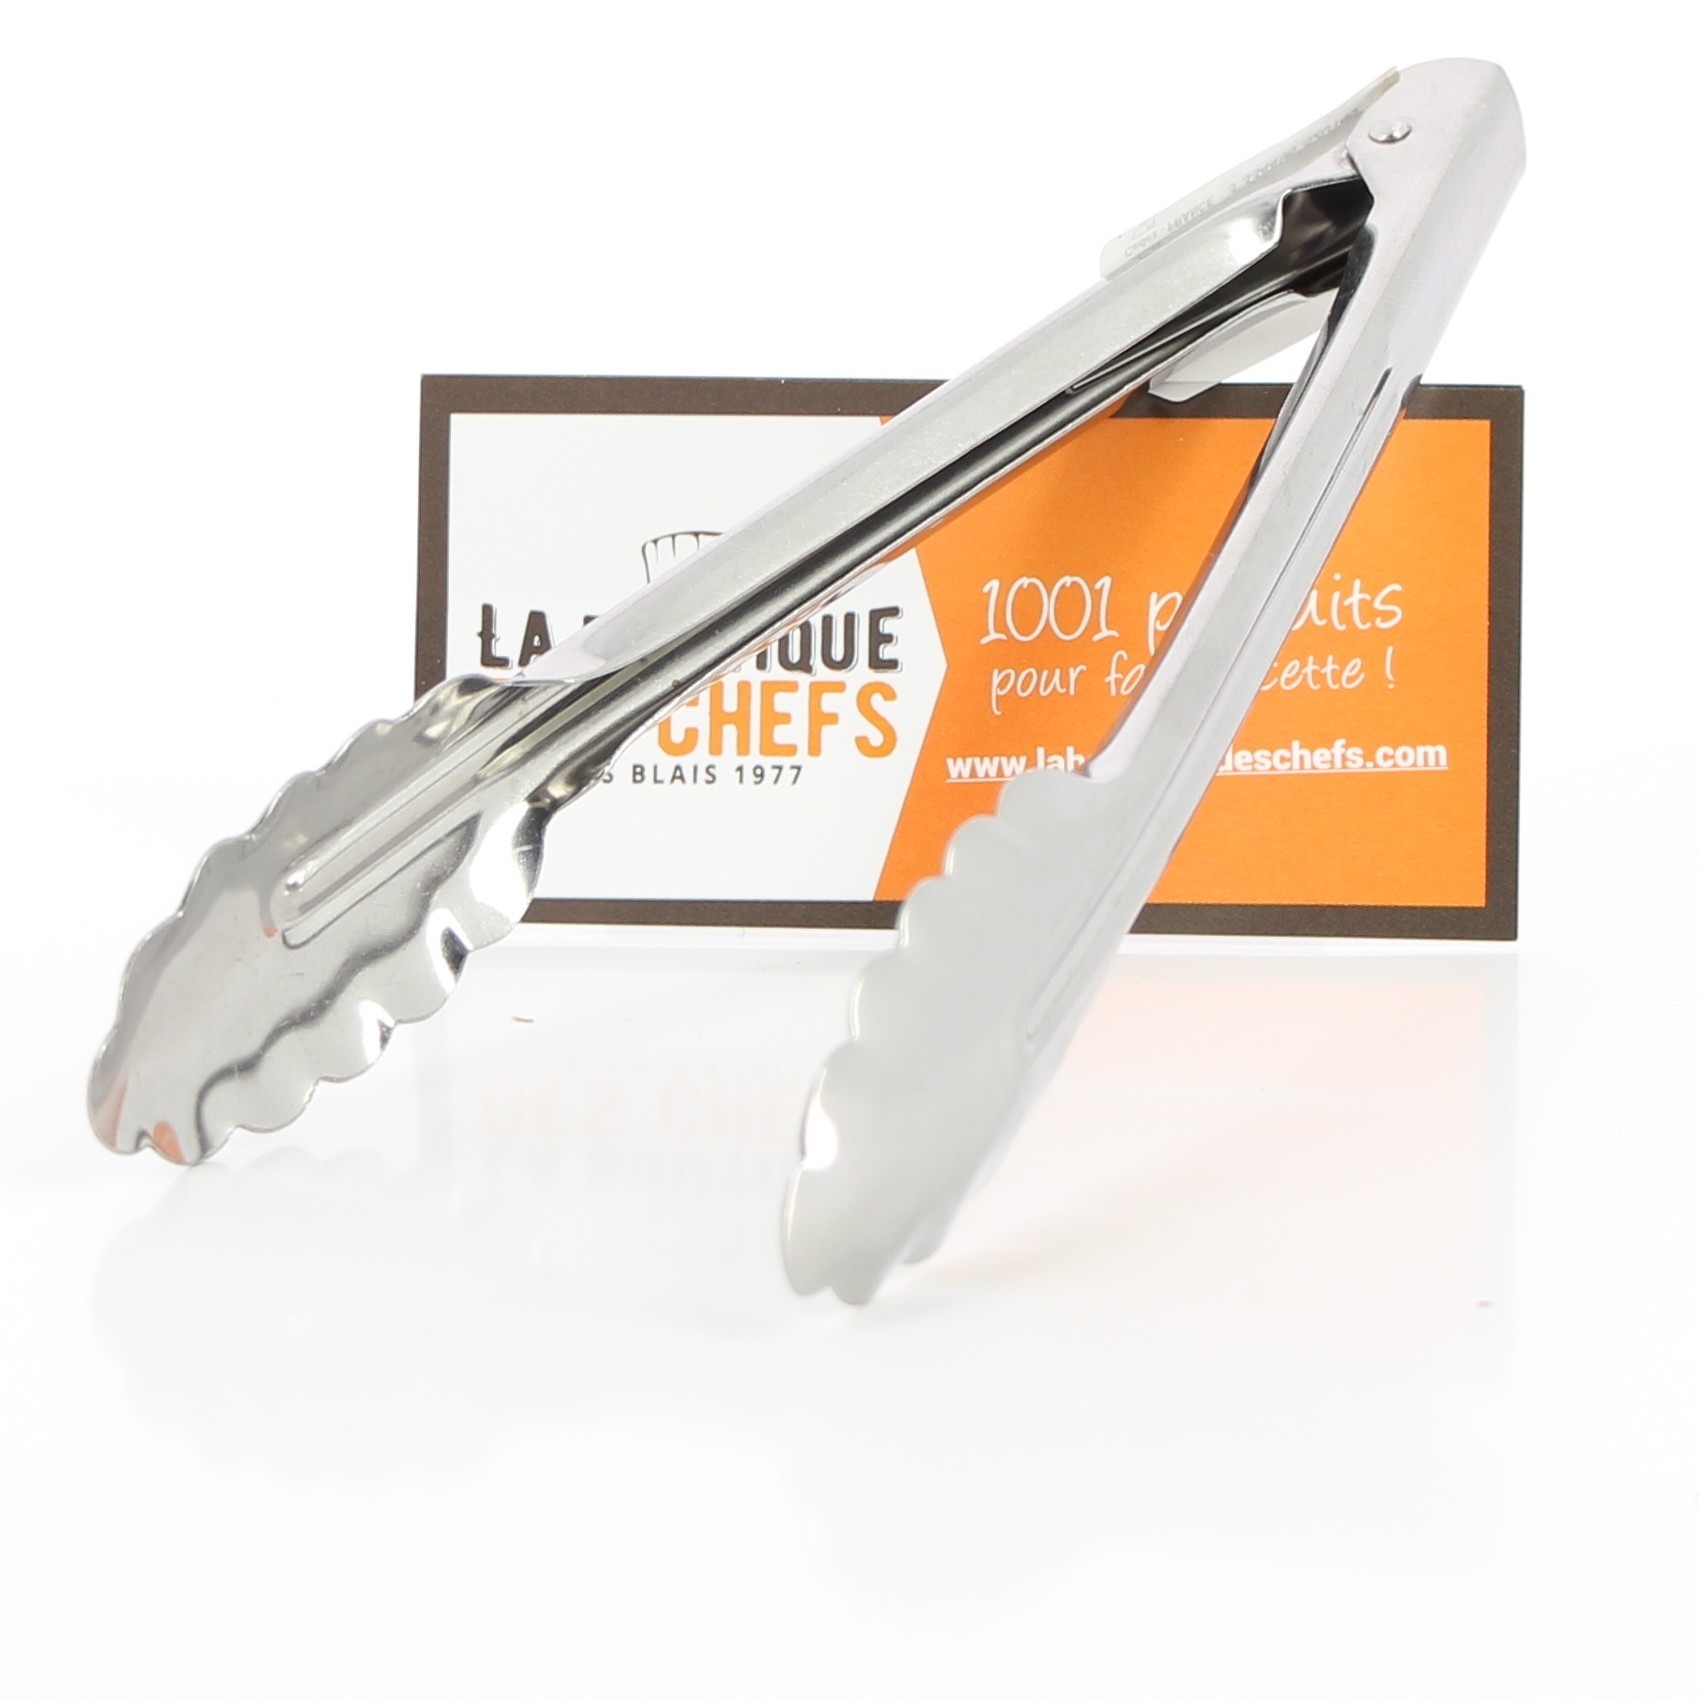 Pince Cuisine, Pince Alimentaire Silicone, Pince Grille Pain